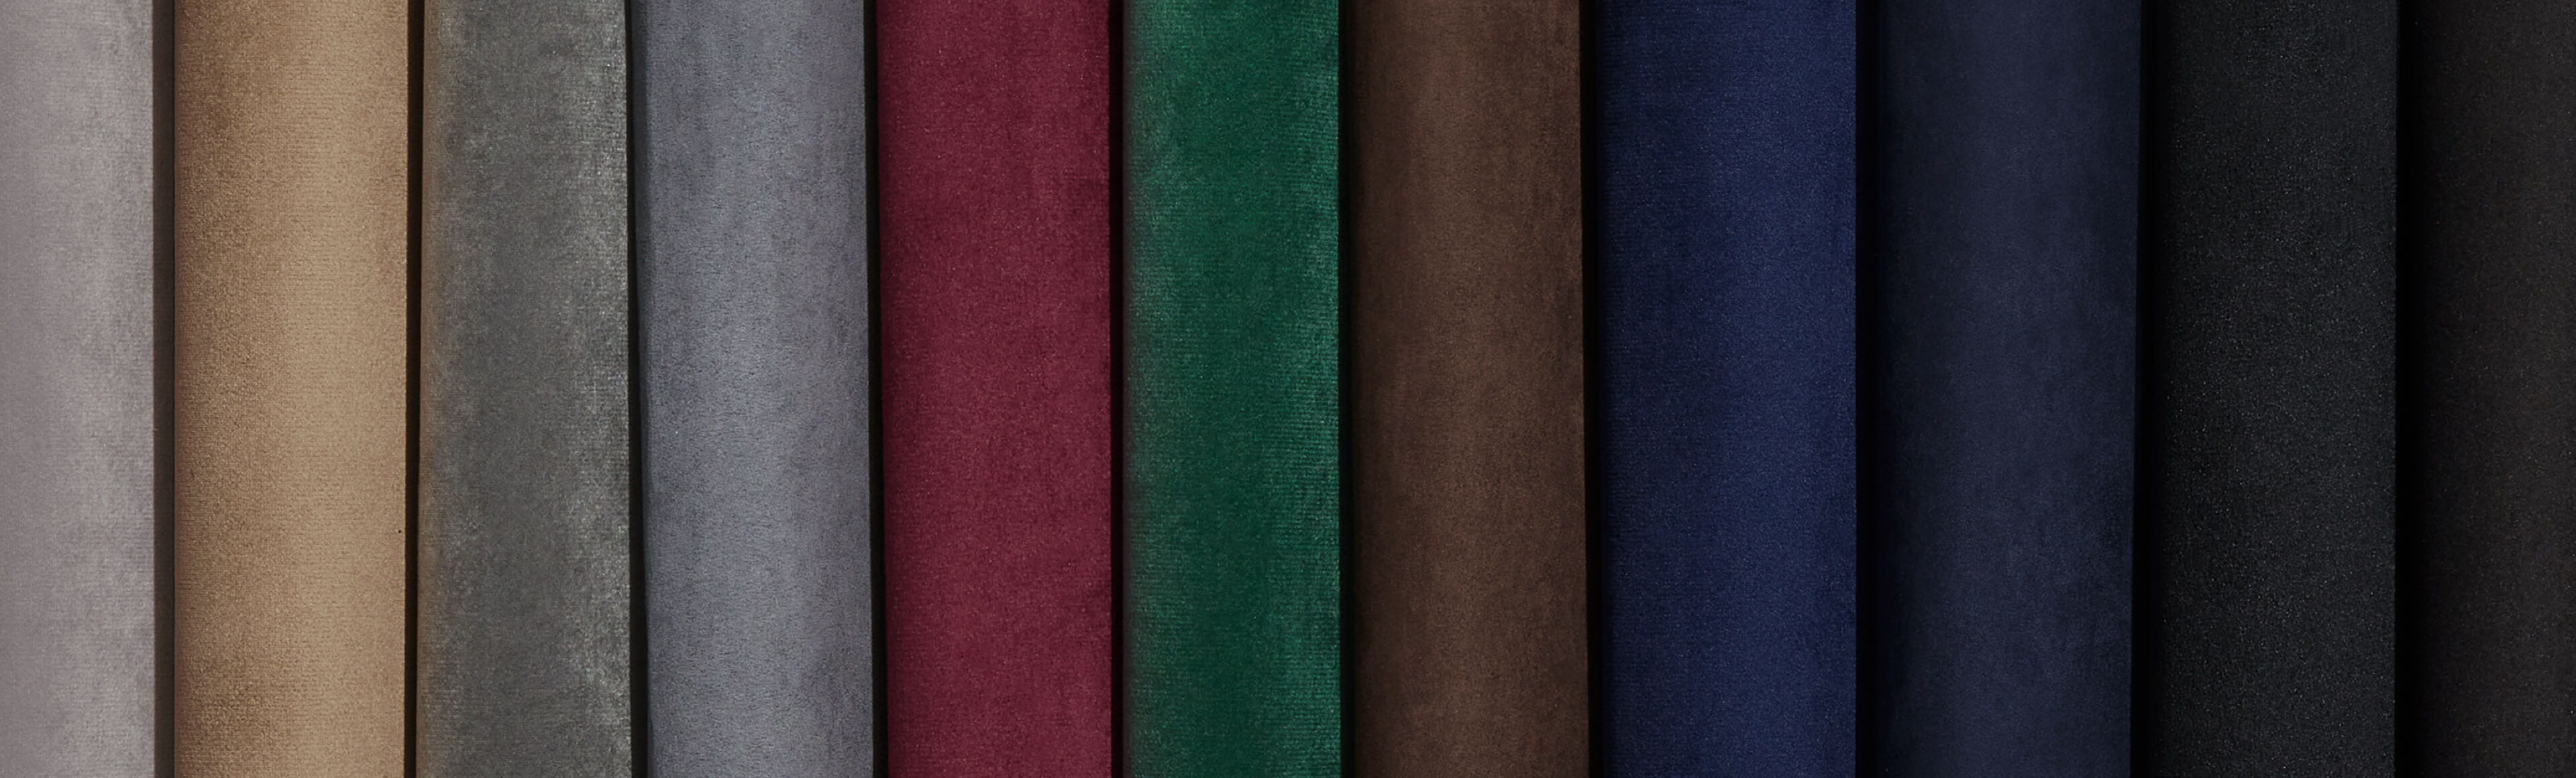 suede and velvet material in different colors